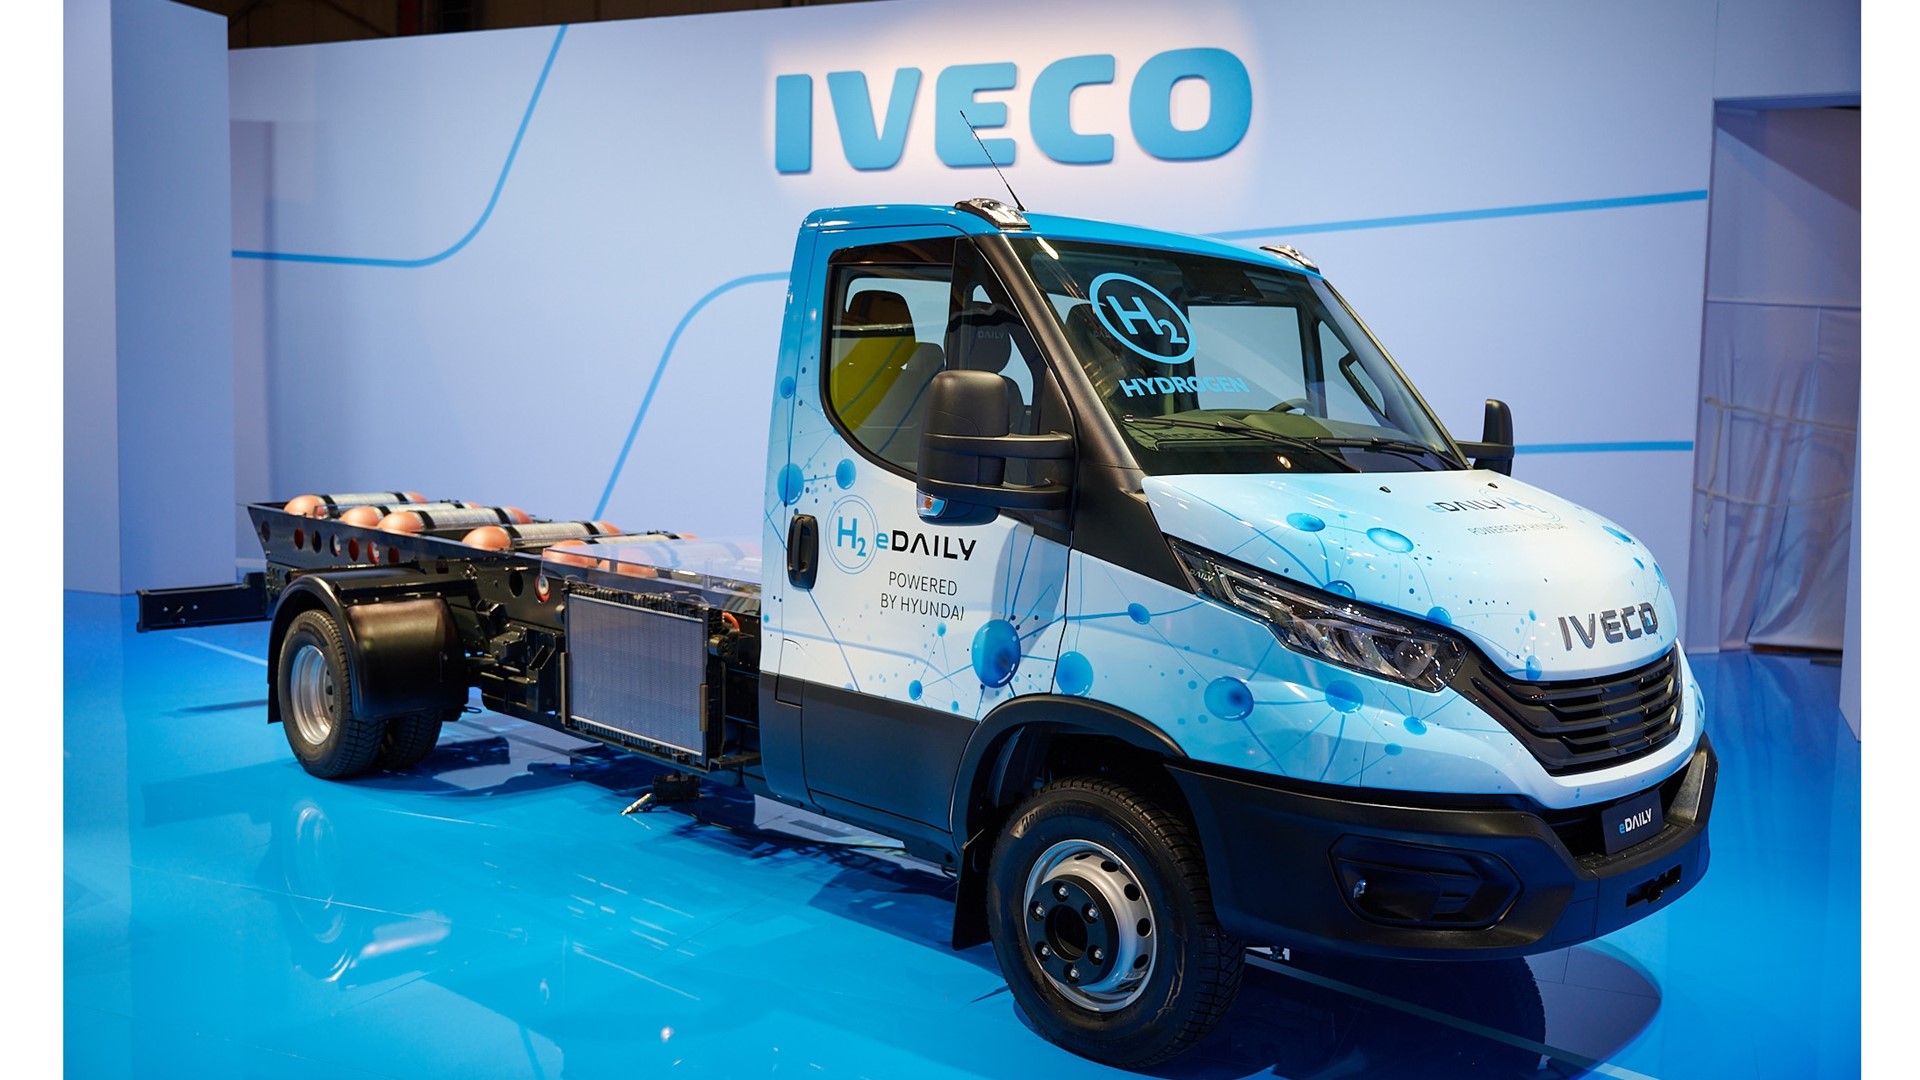 IVECO and Hyundai present the first fuel cell large van at IAA in Hanover as their partnership develops